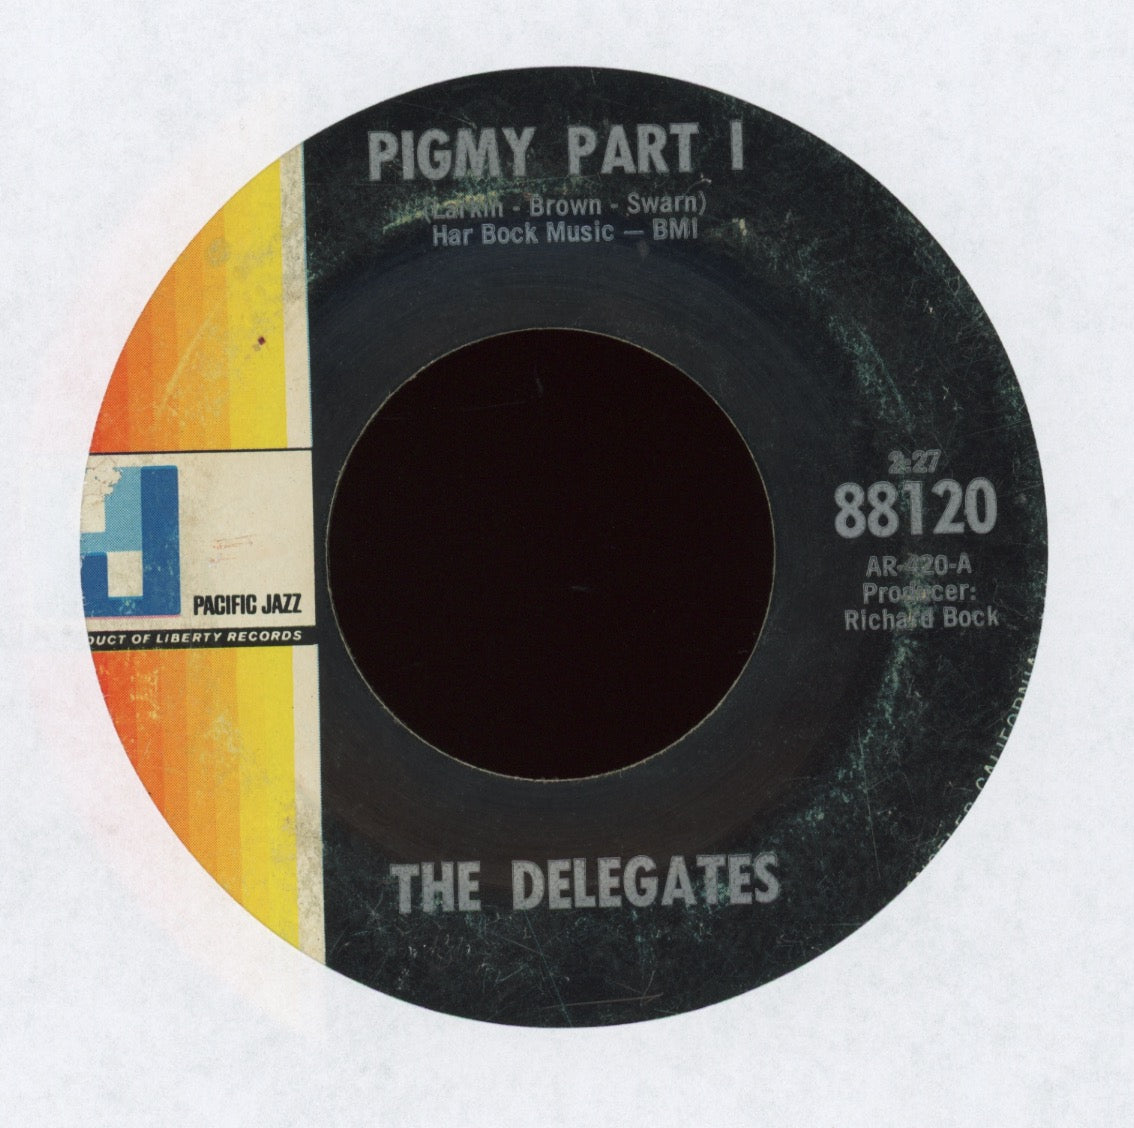 Billy Larkin And The Delegates - Pigmy Part I on Pacific Jazz